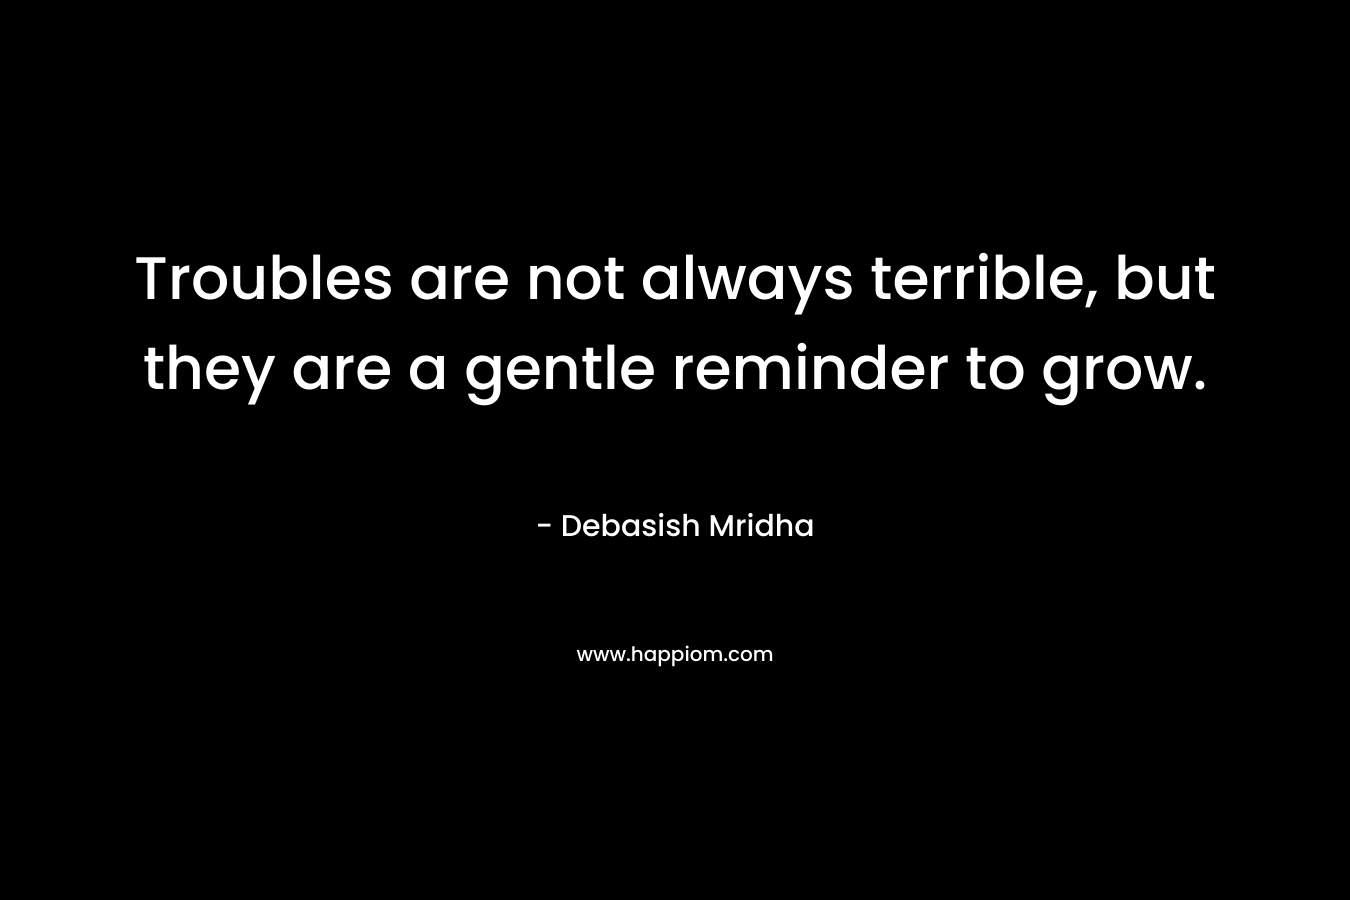 Troubles are not always terrible, but they are a gentle reminder to grow. – Debasish Mridha